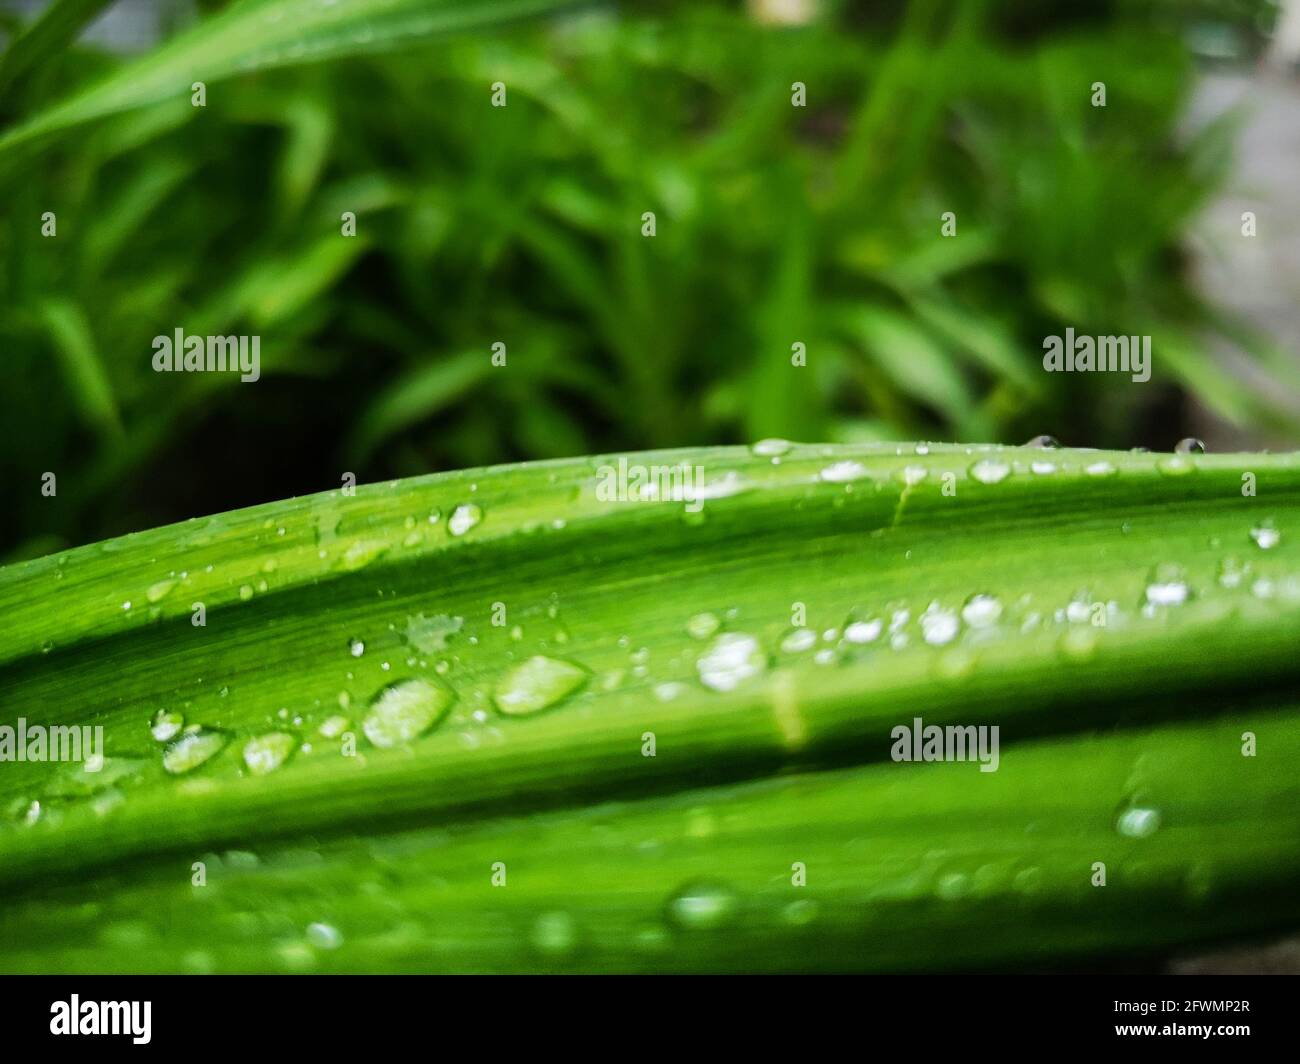 Summer background. Macro photo of water droplets on green leaves Stock Photo